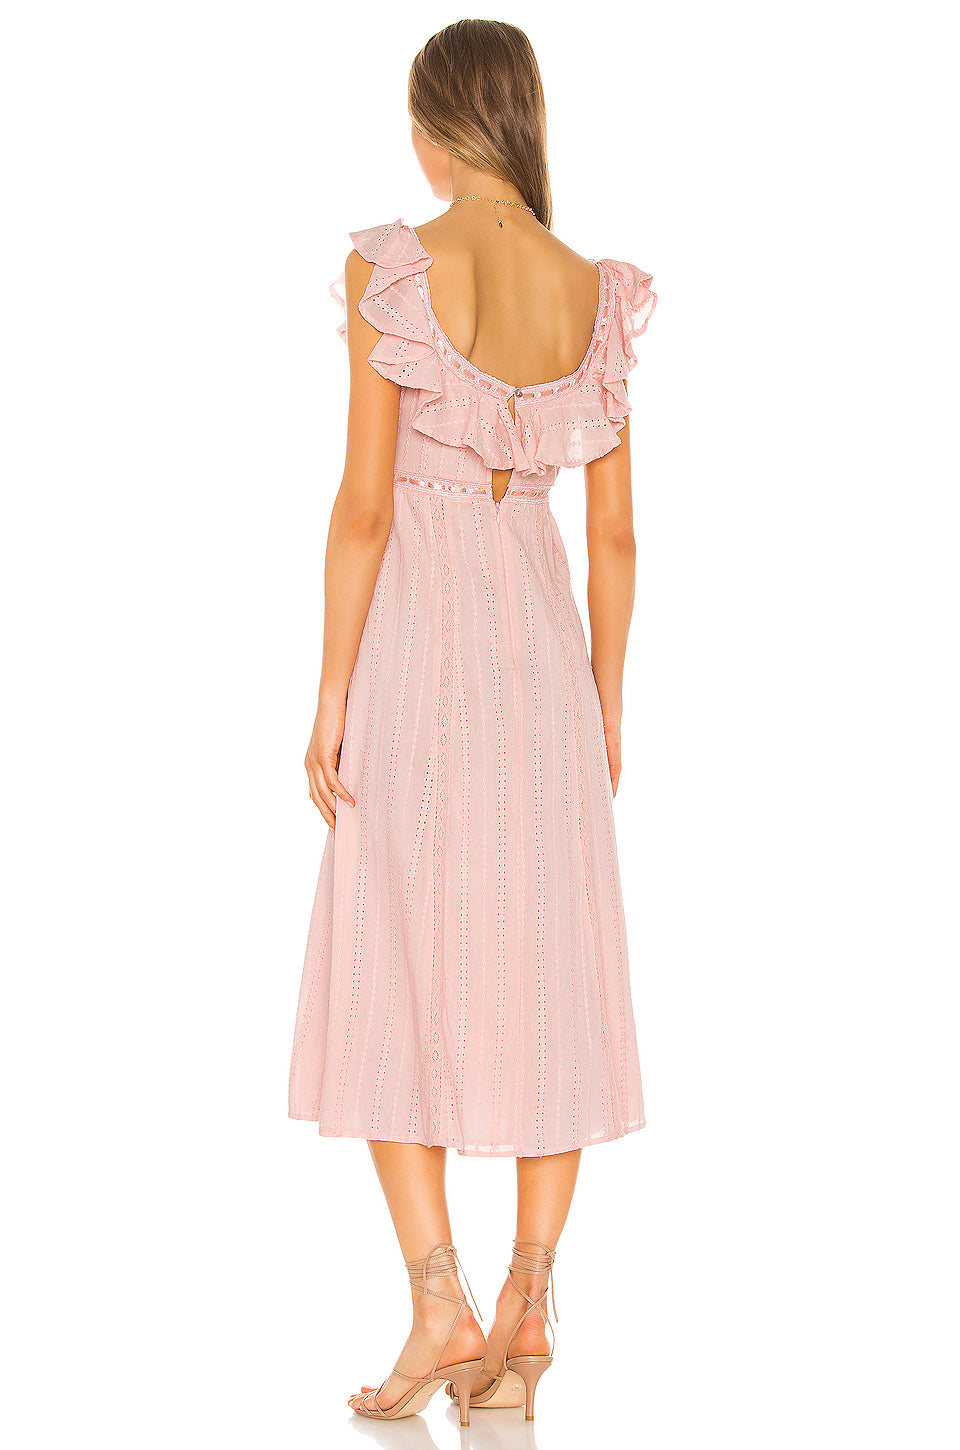 Ande Midi Dress in BABY PINK